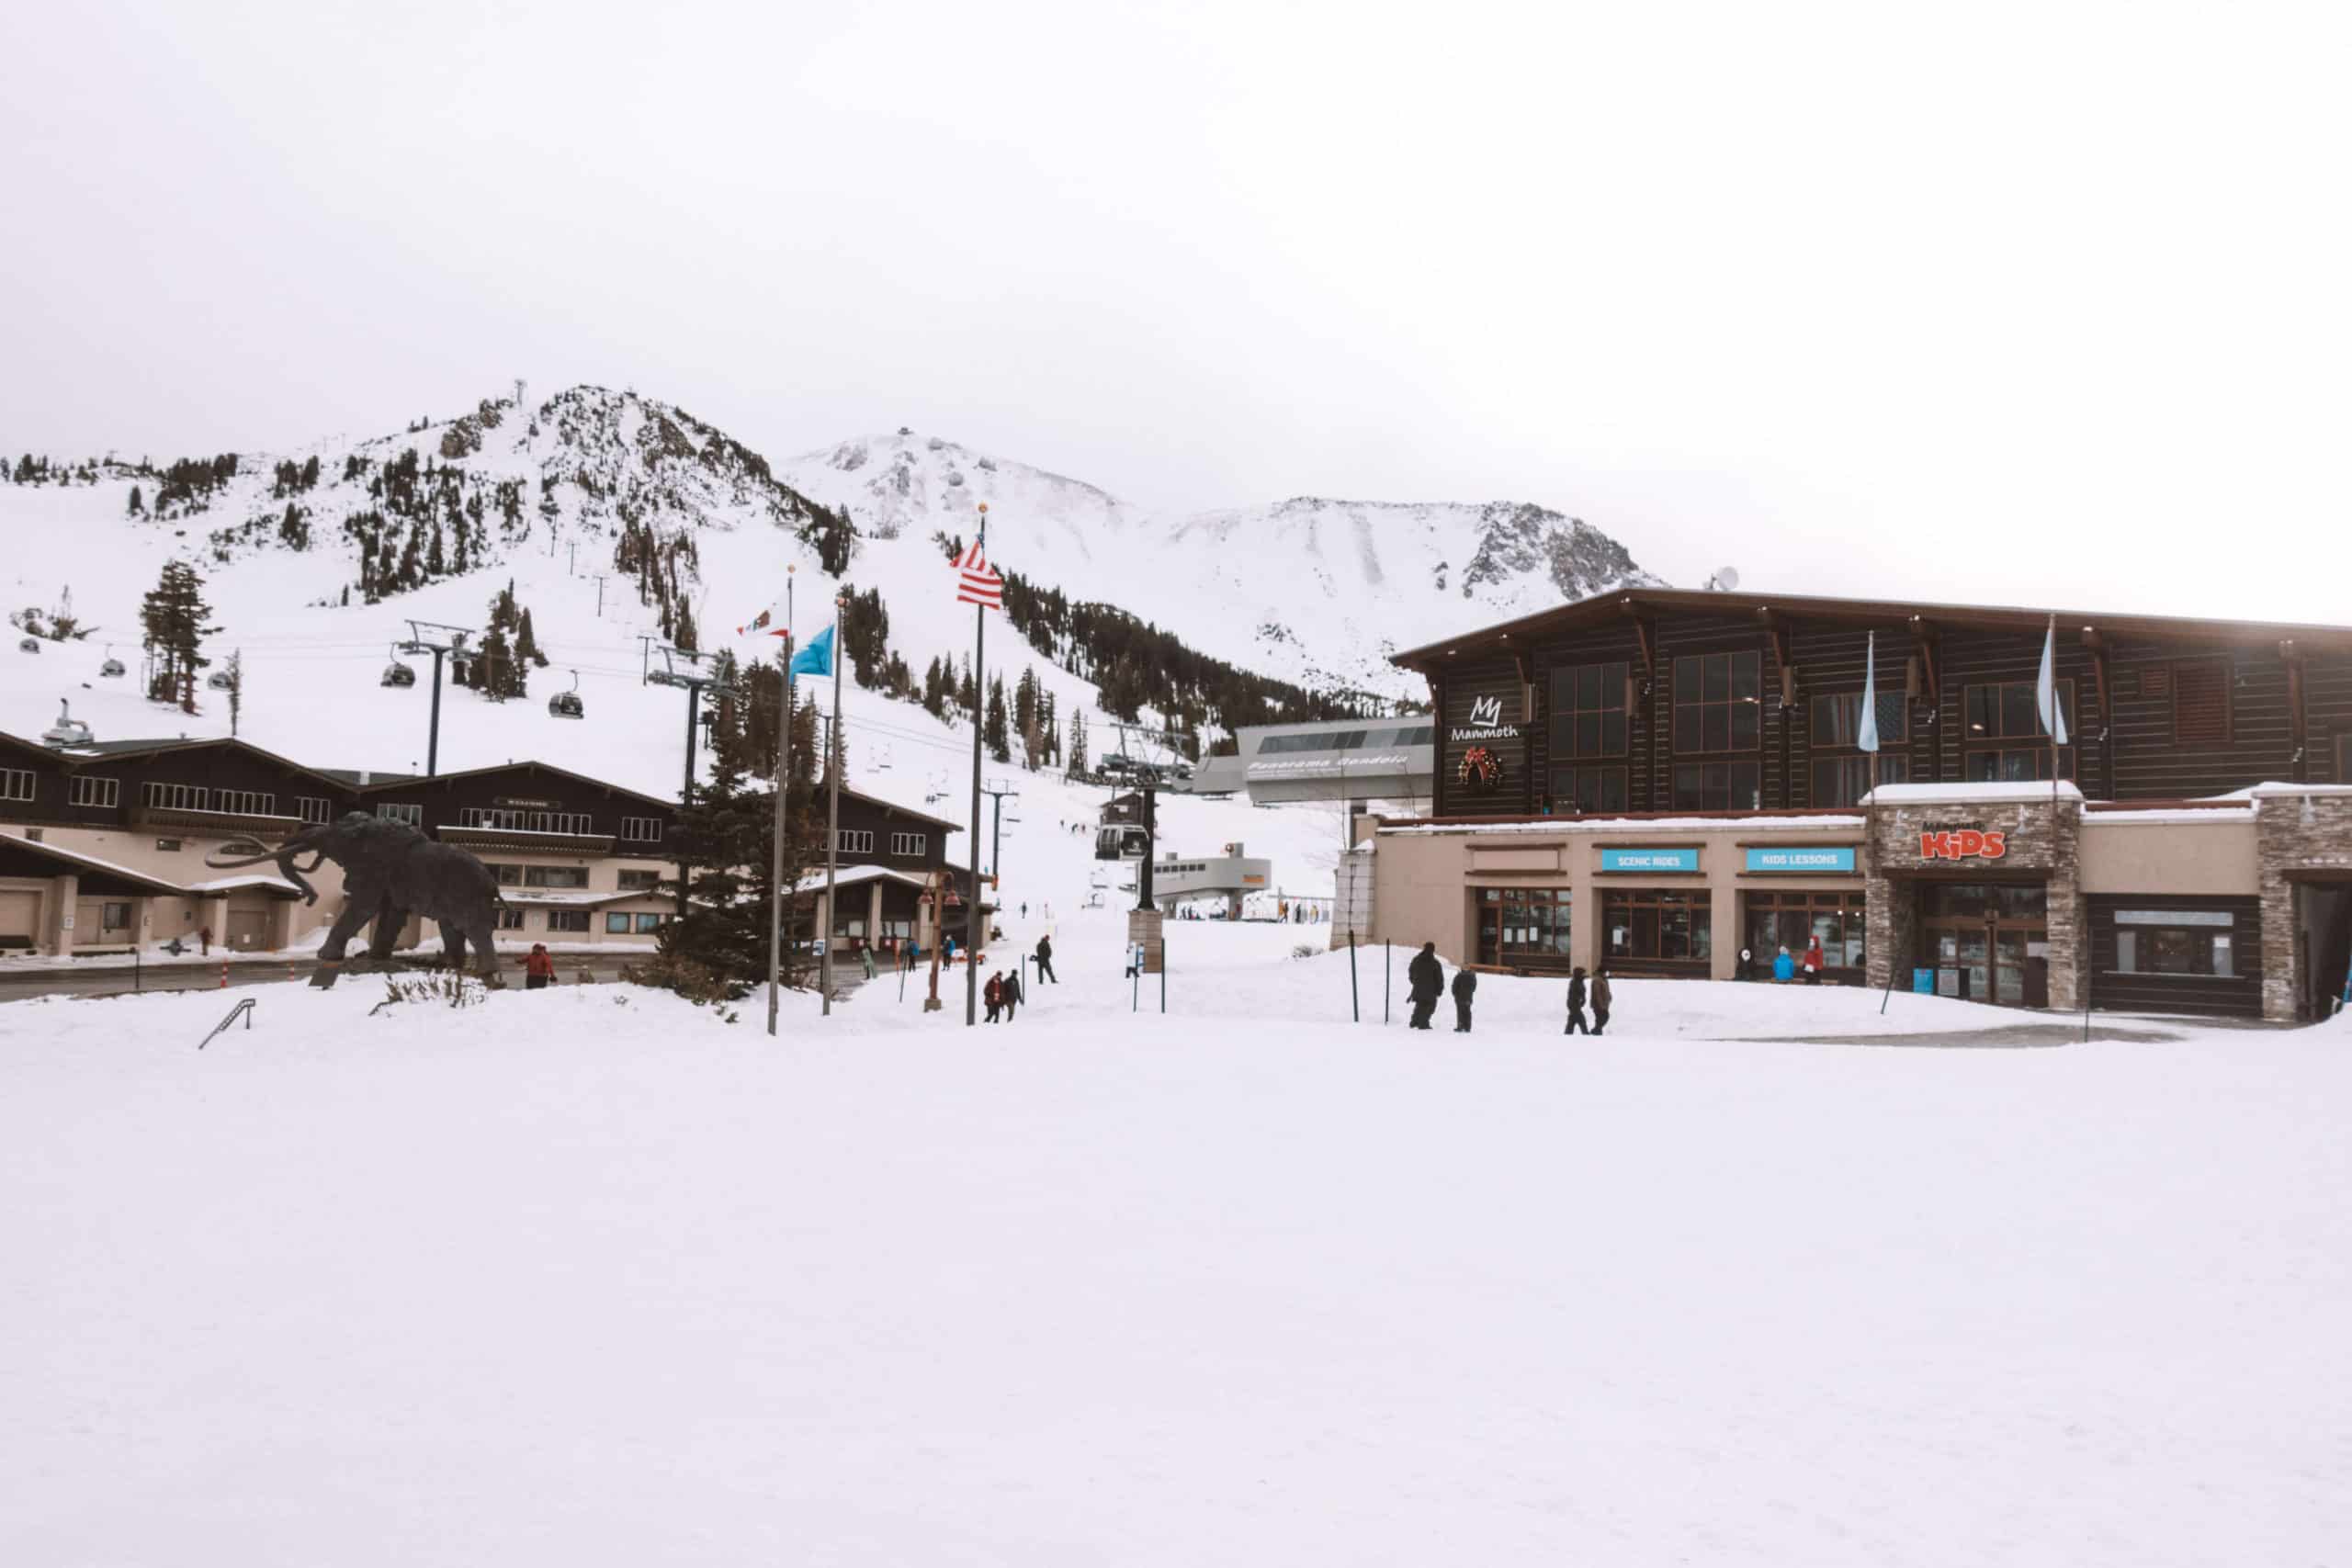 Main Lodge area at Mammoth Mountain Resort | The Ultimate Guide to Mammoth Lakes in the Winter